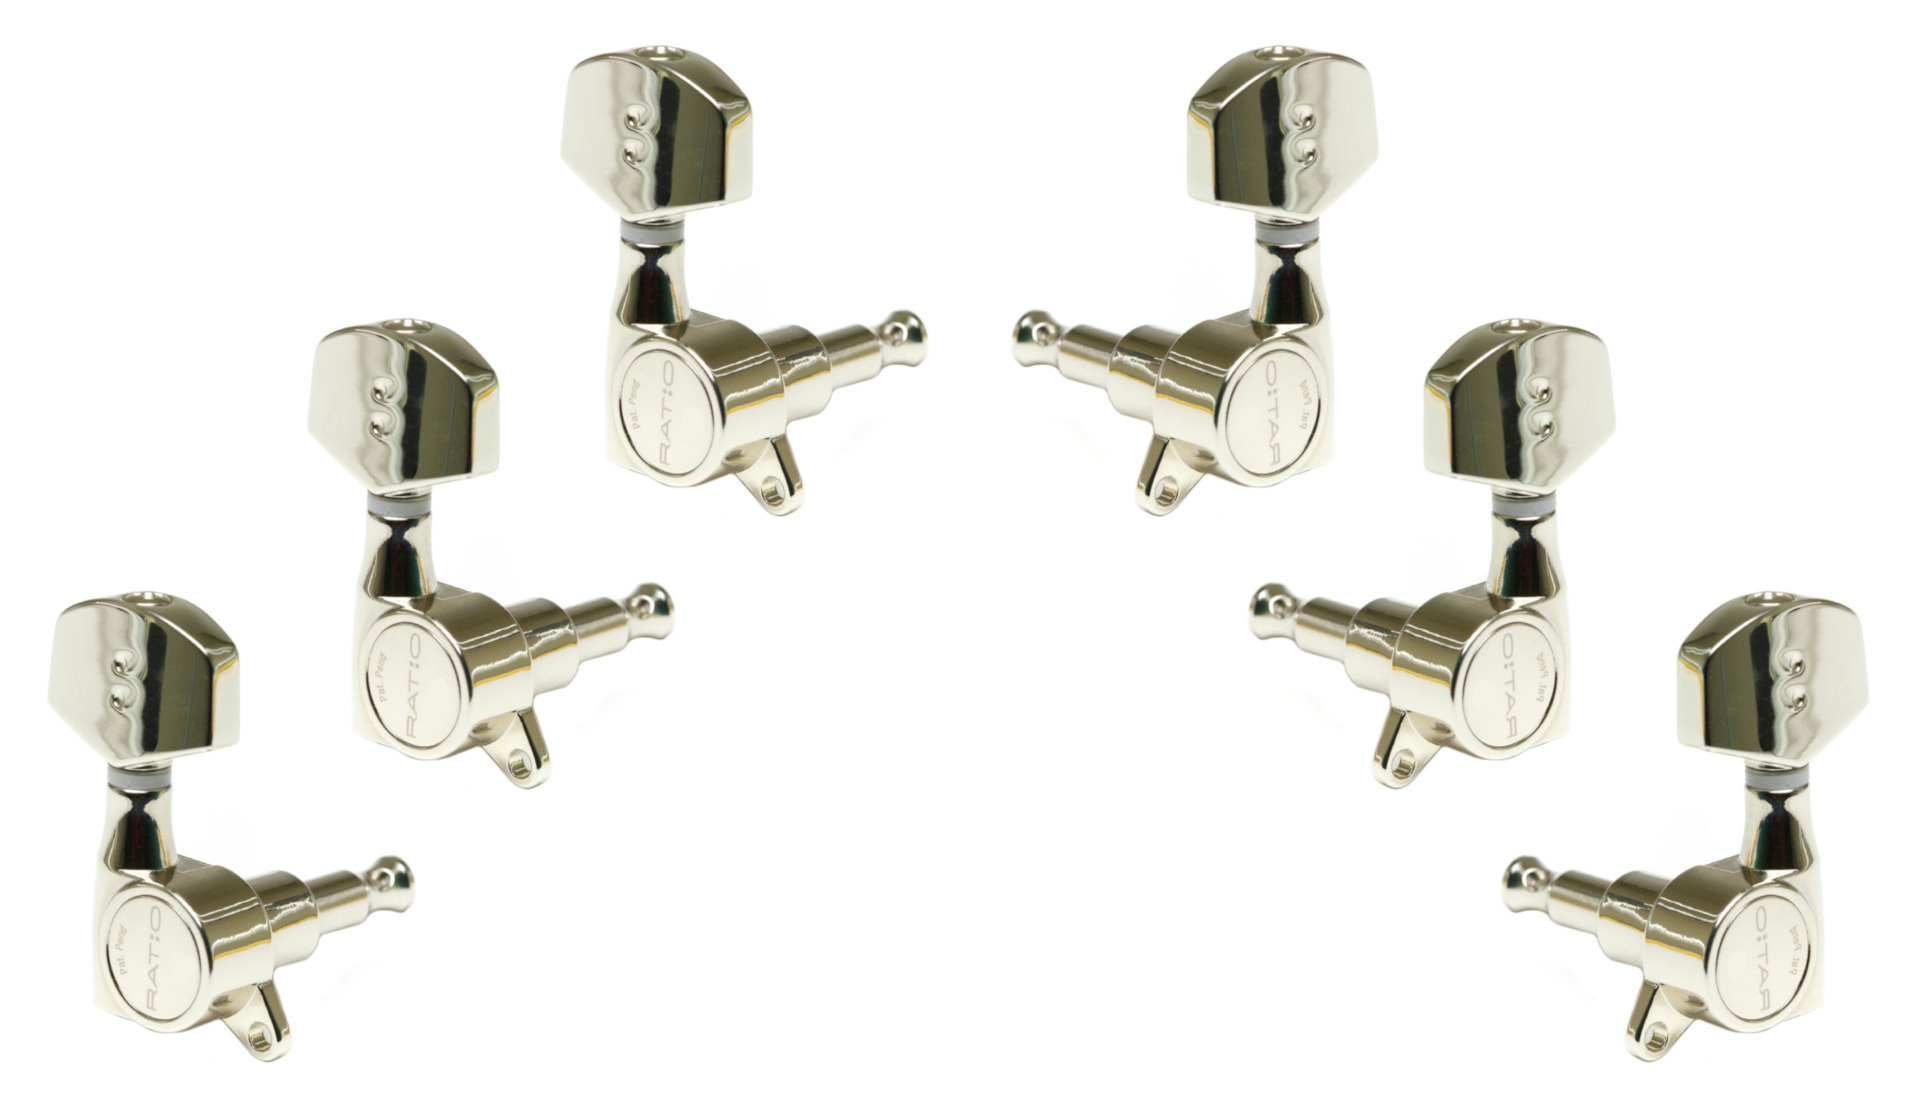 Graph Tech PRN-4411-N0 Ratio Acoustic Guitar Machine Heads with Contemporary Button, Offset Screw - 3 + 3 - Nickel